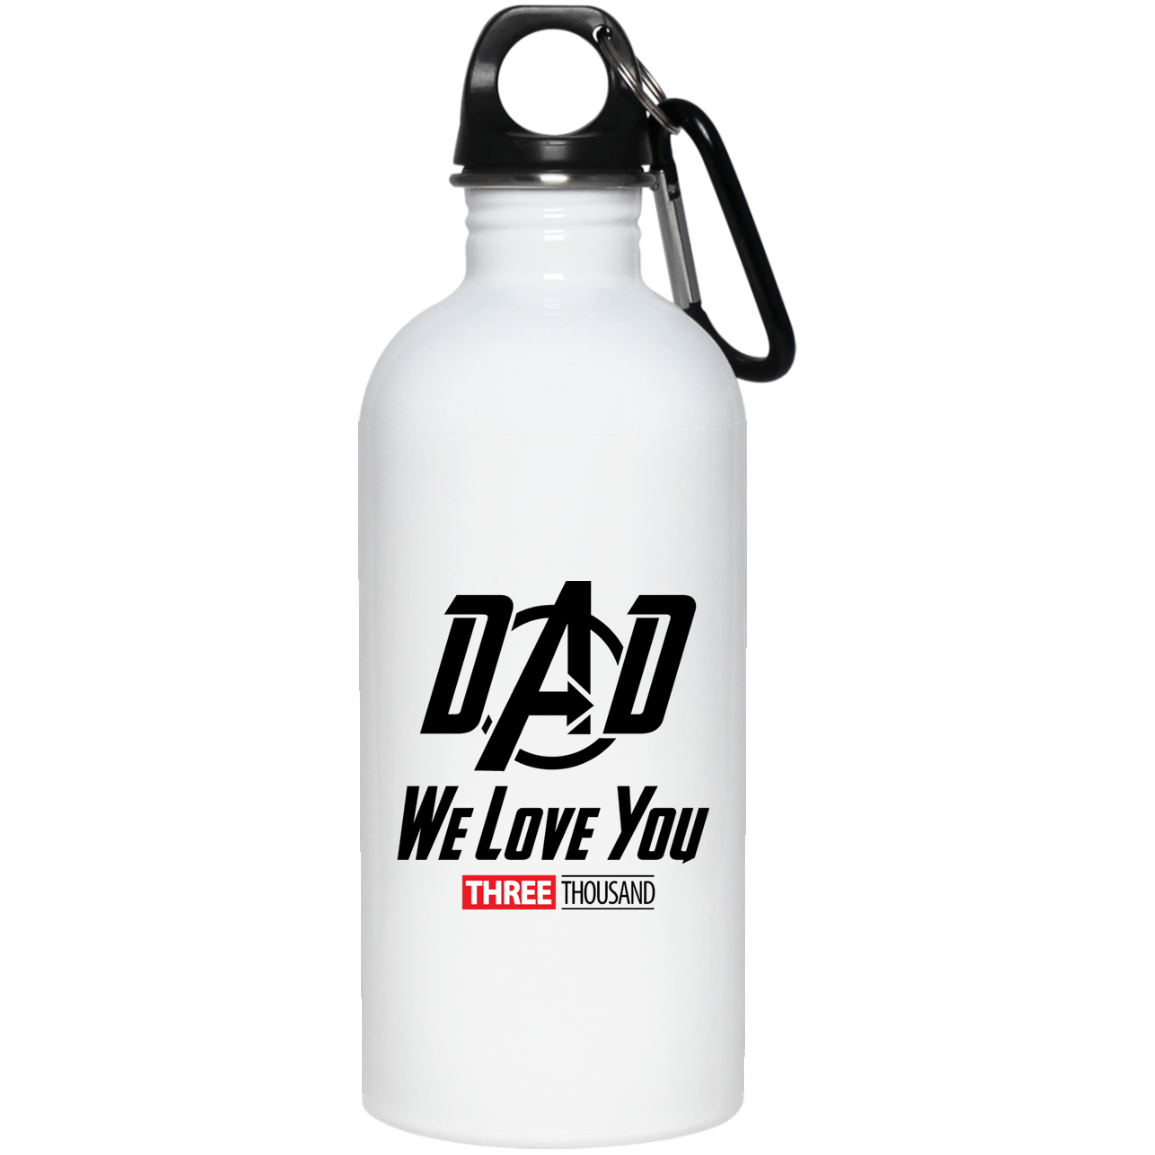 Dad We Love You Three Thousand - 20 oz. Stainless Steel Water Bottle